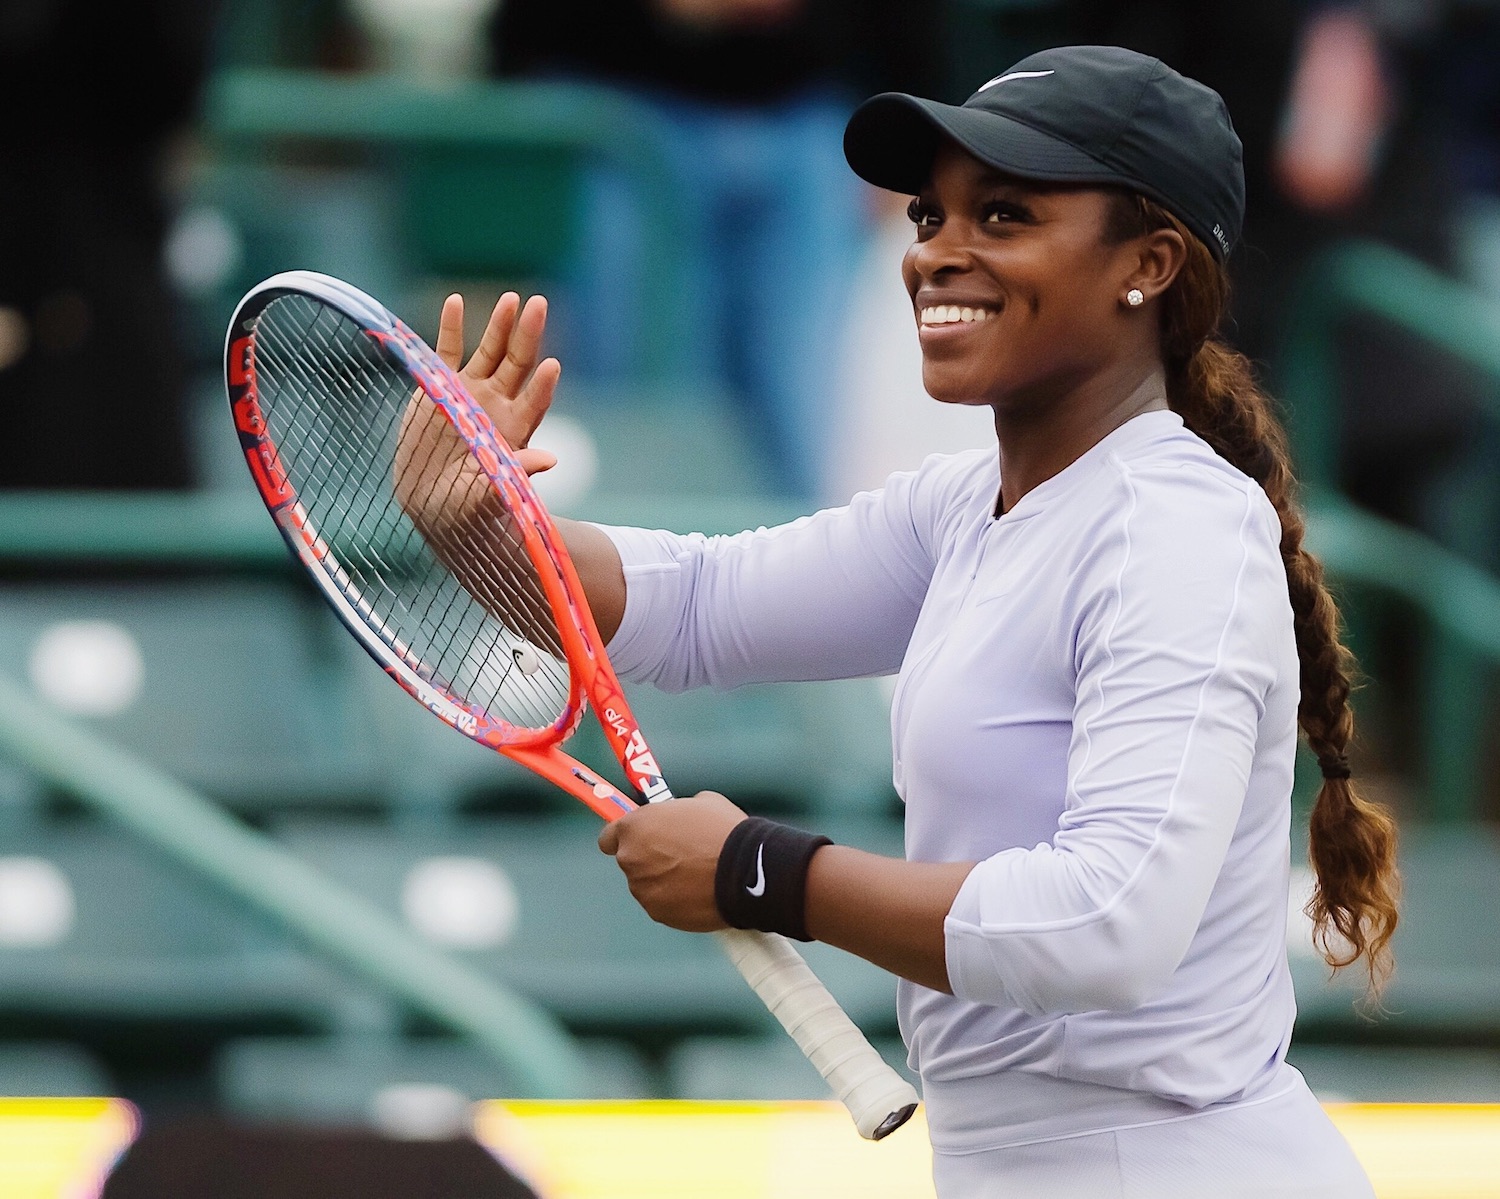 Tennis Icon Sloane Stephens Has a Drive for Success